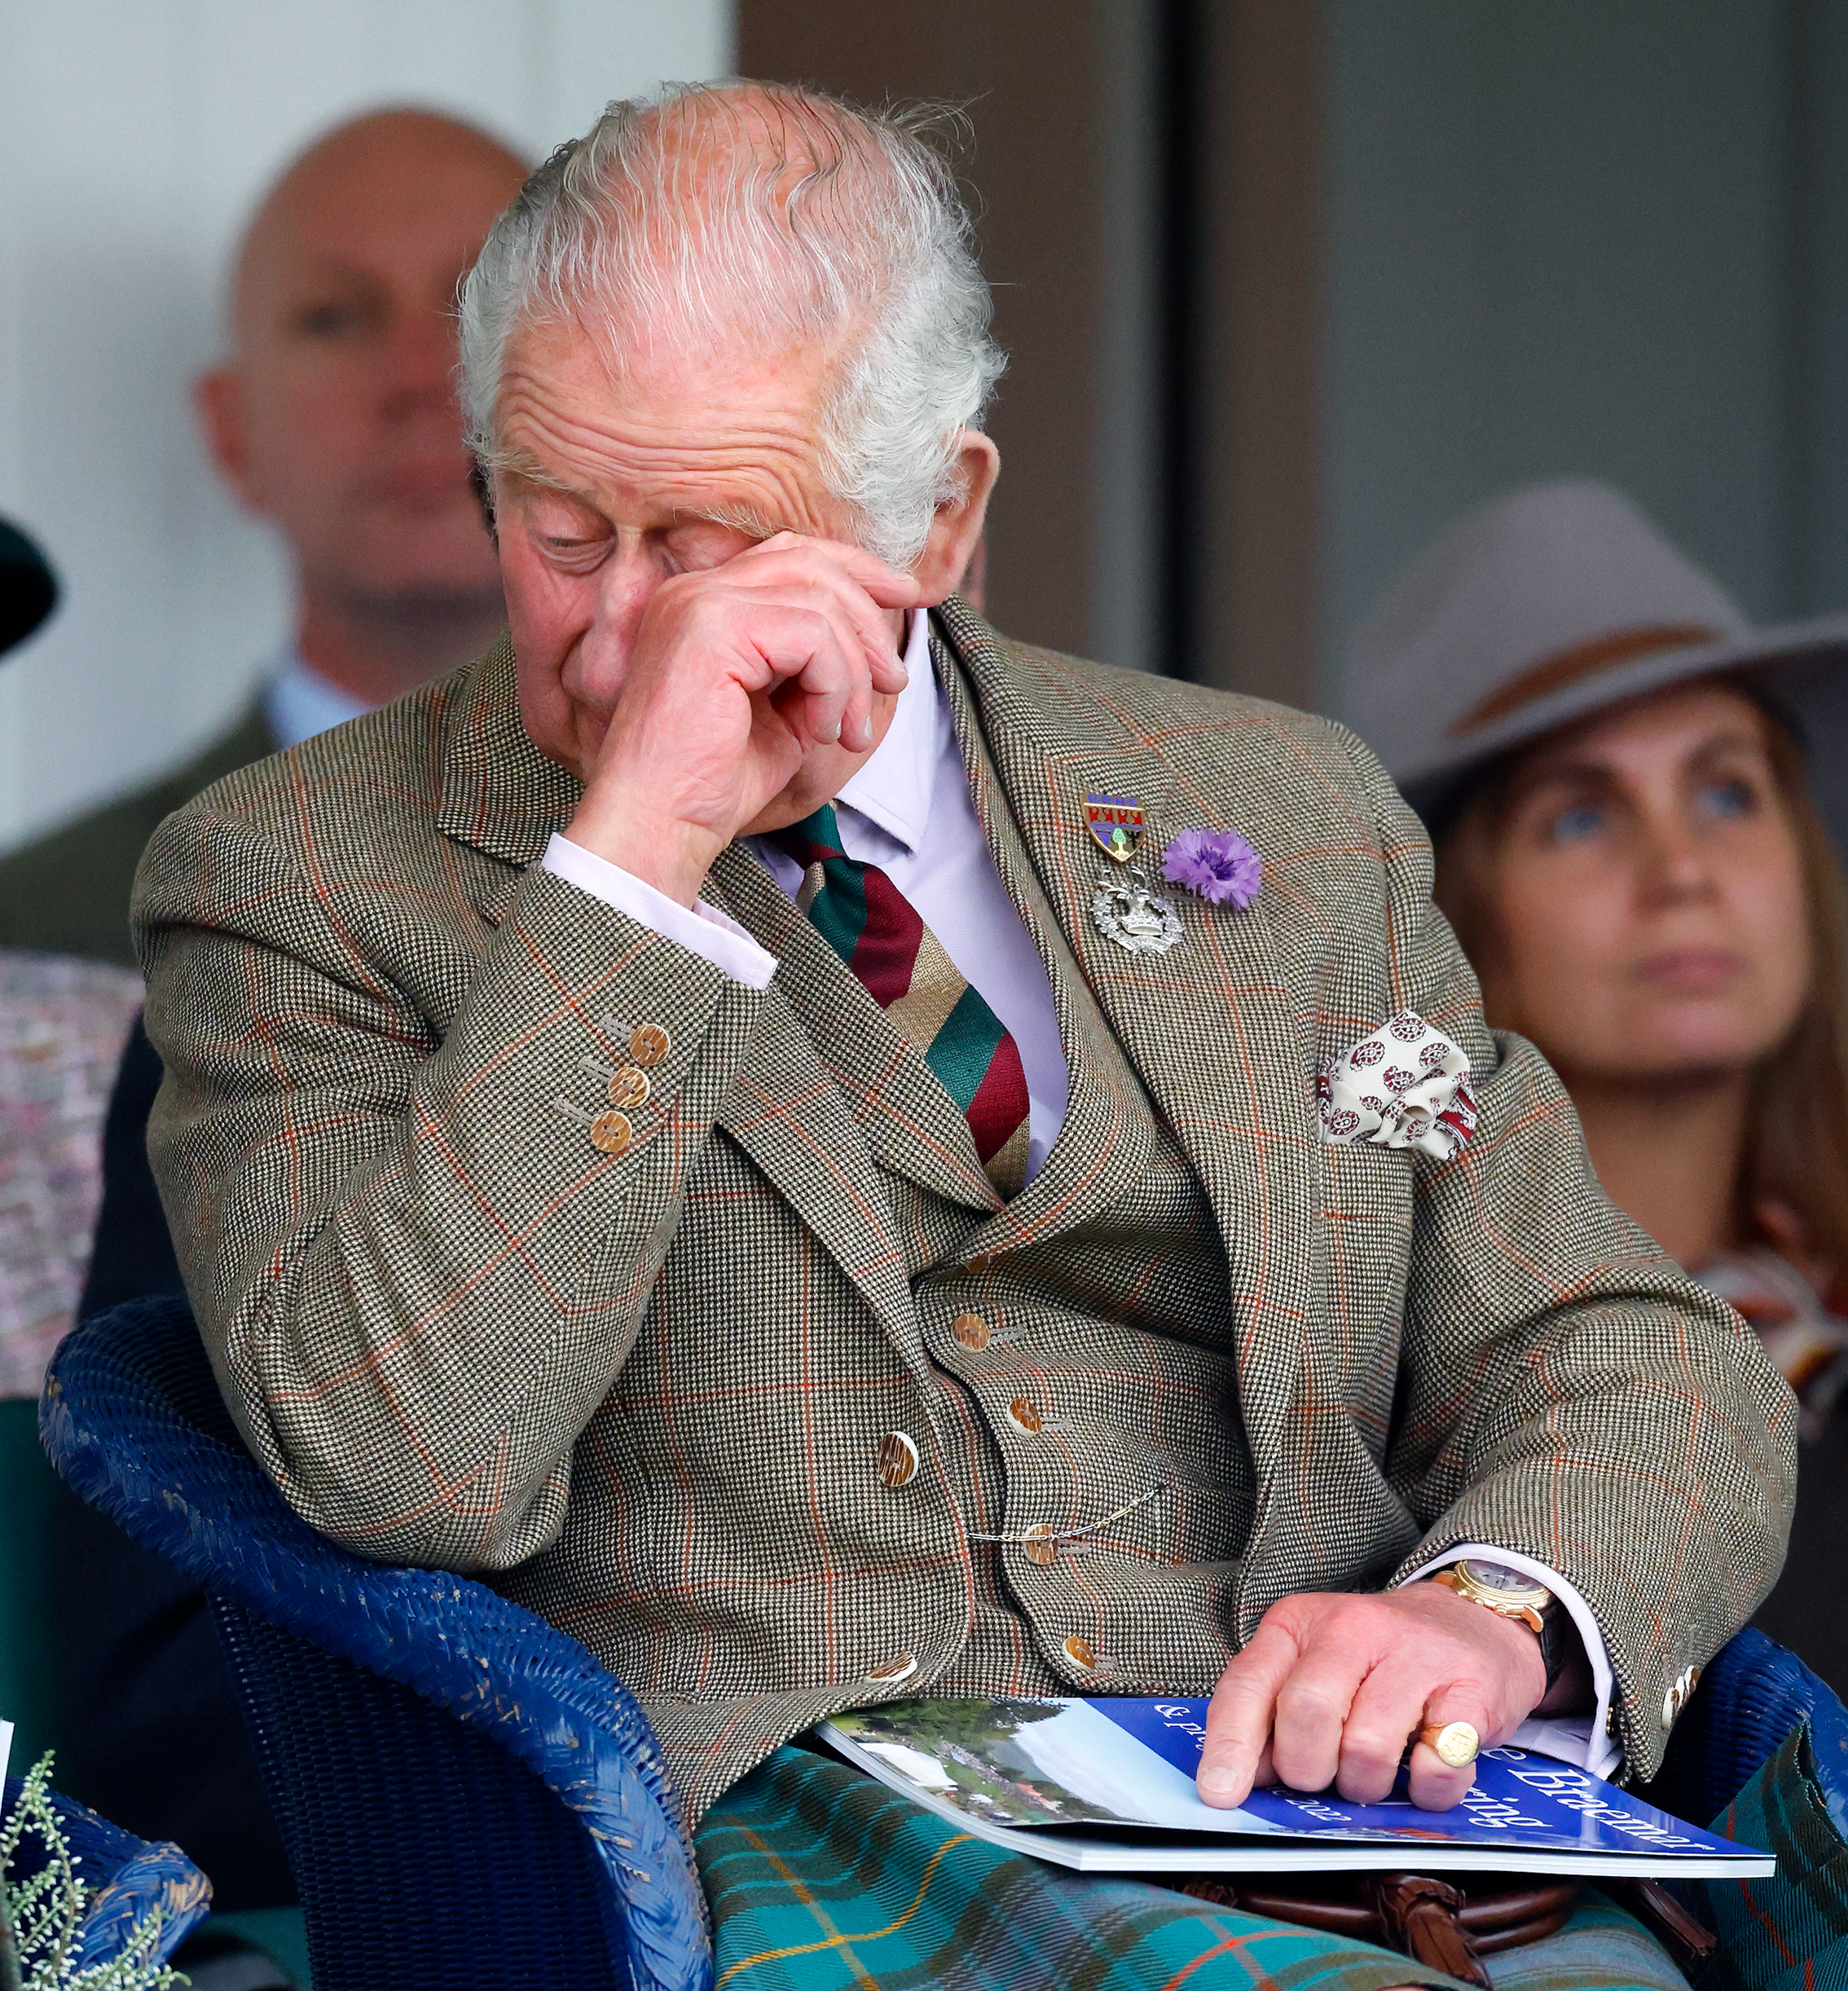 King Charles III attends the Braemar Highland Gathering at The Princess Royal and Duke of Fife Memorial Park on September 3, 2022, in Braemar, Scotland. | Source: Getty Images